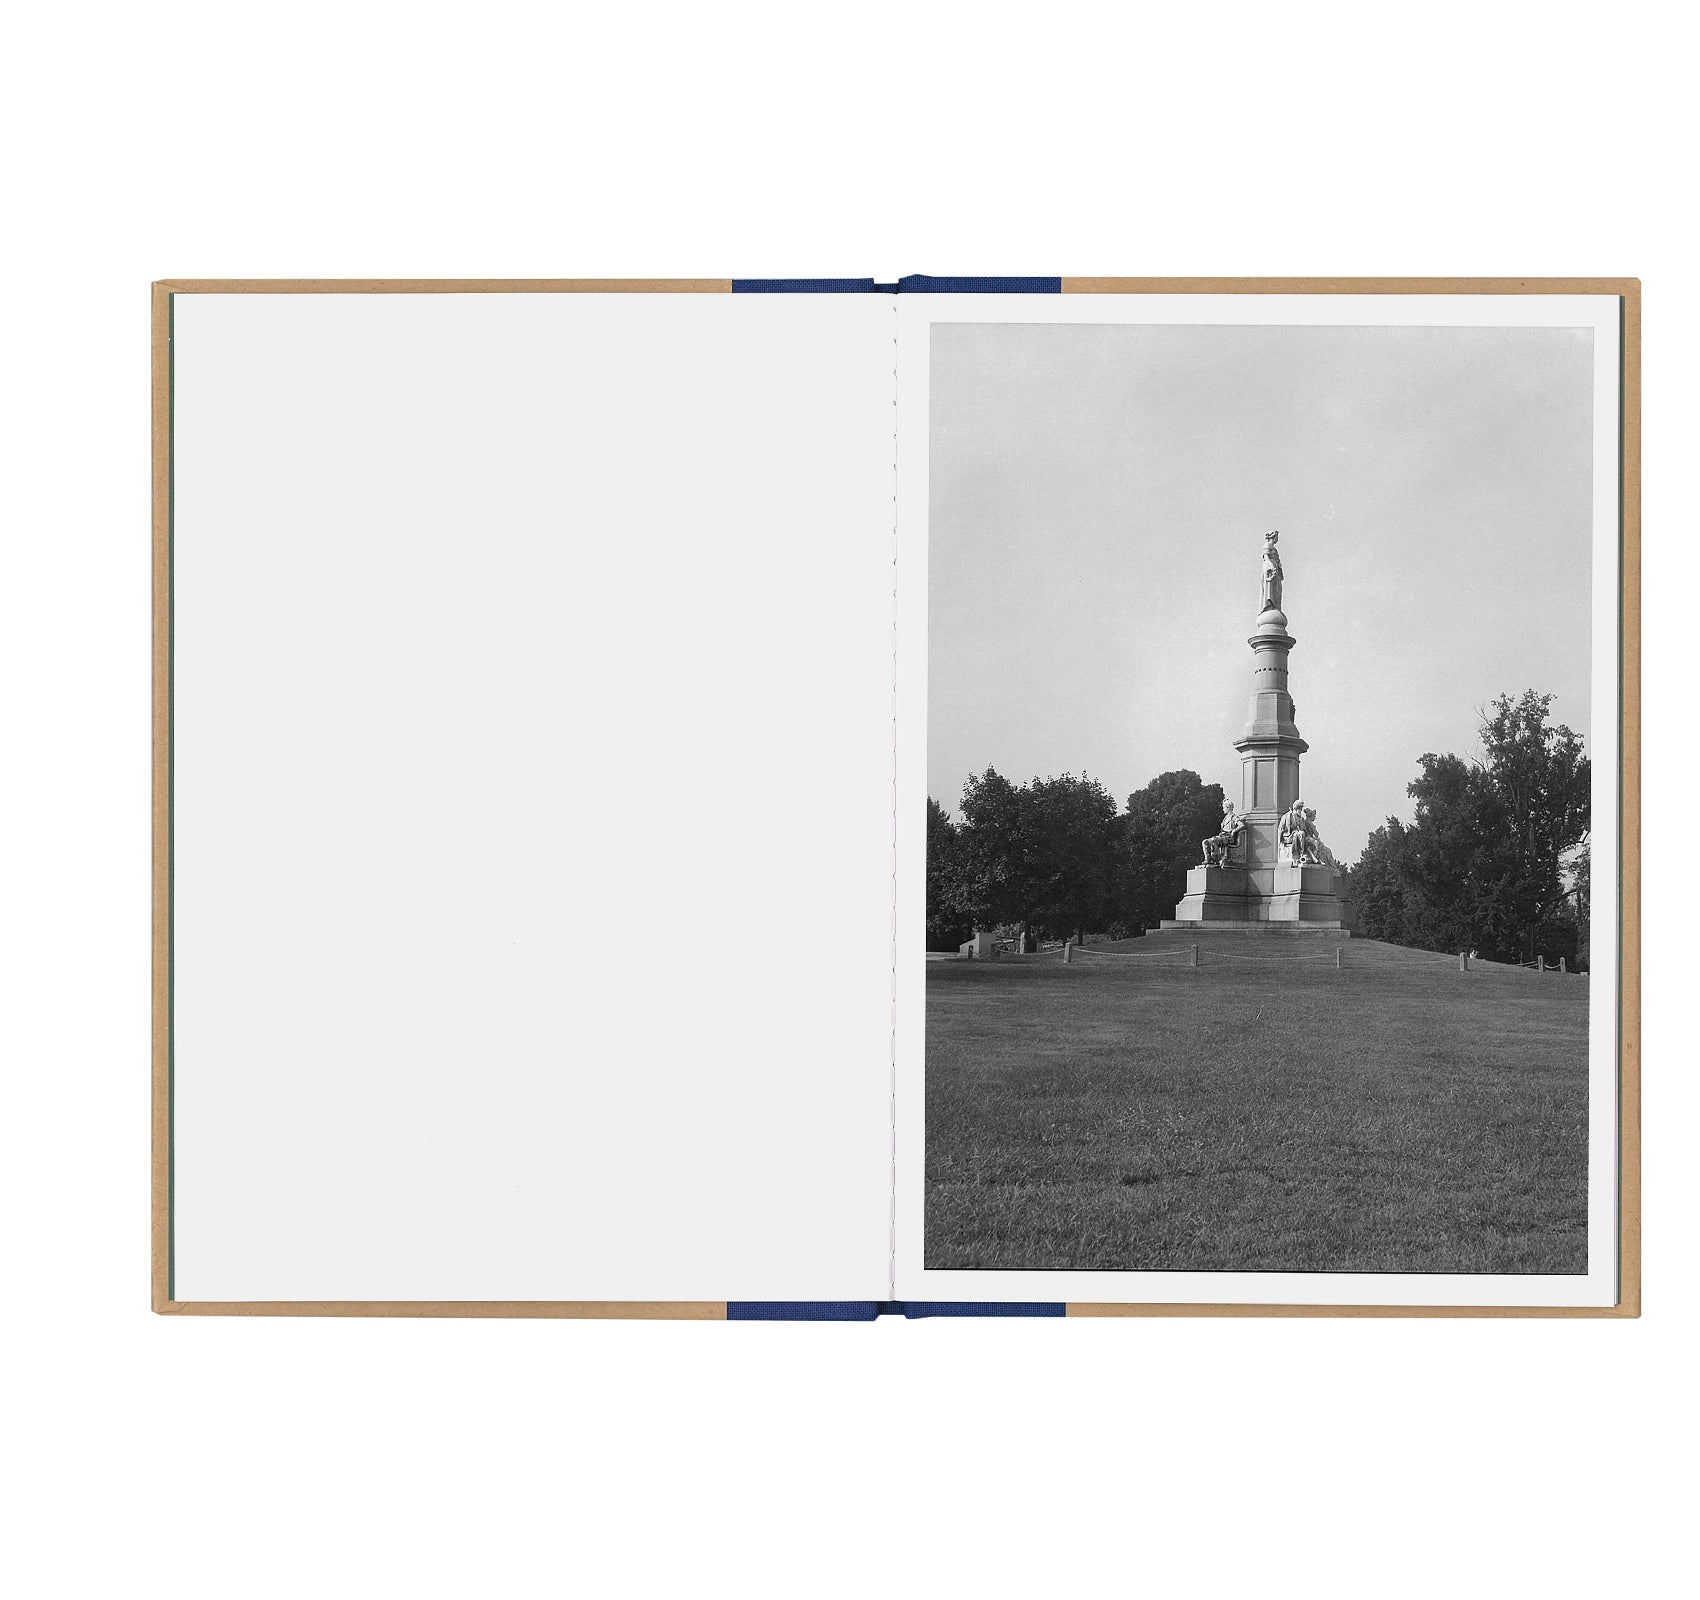 ONE PICTURE BOOK TWO #03: MONUMENT by Carrie Mae Weems